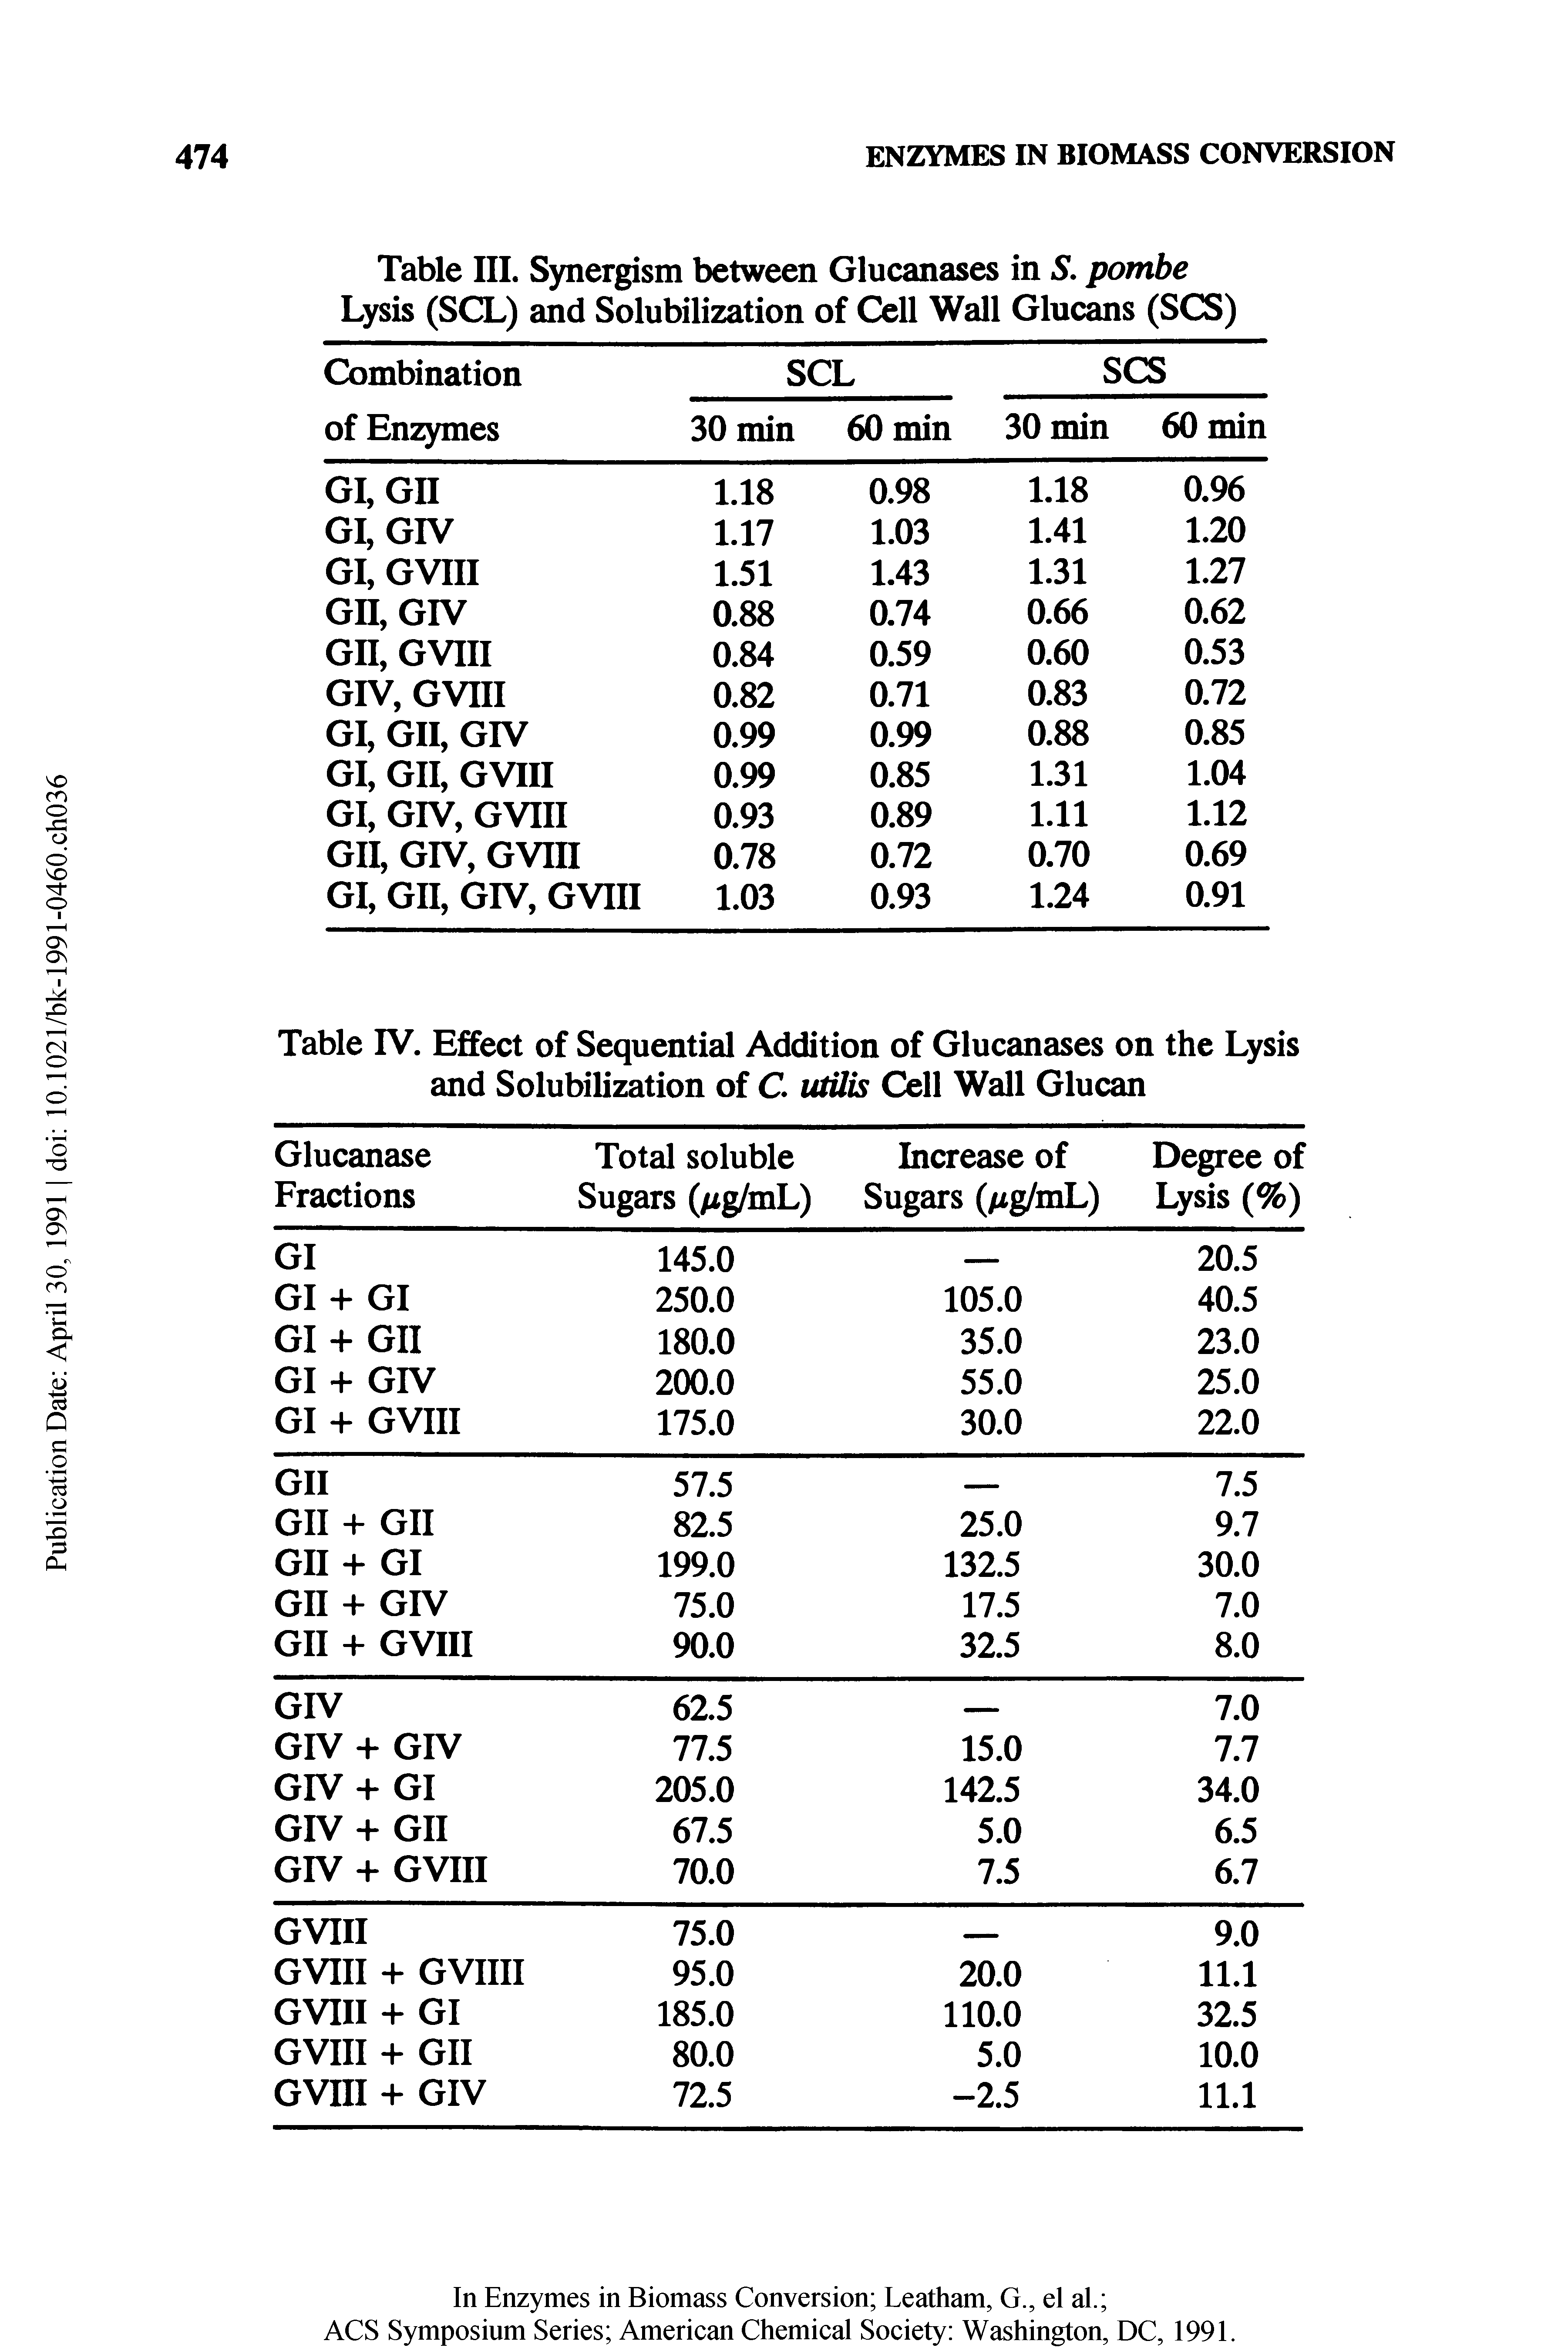 Table IV. Effect of Sequential Addition of Glucanases on the Lysis and Solubilization of C utilis Cell Wall Glucan...